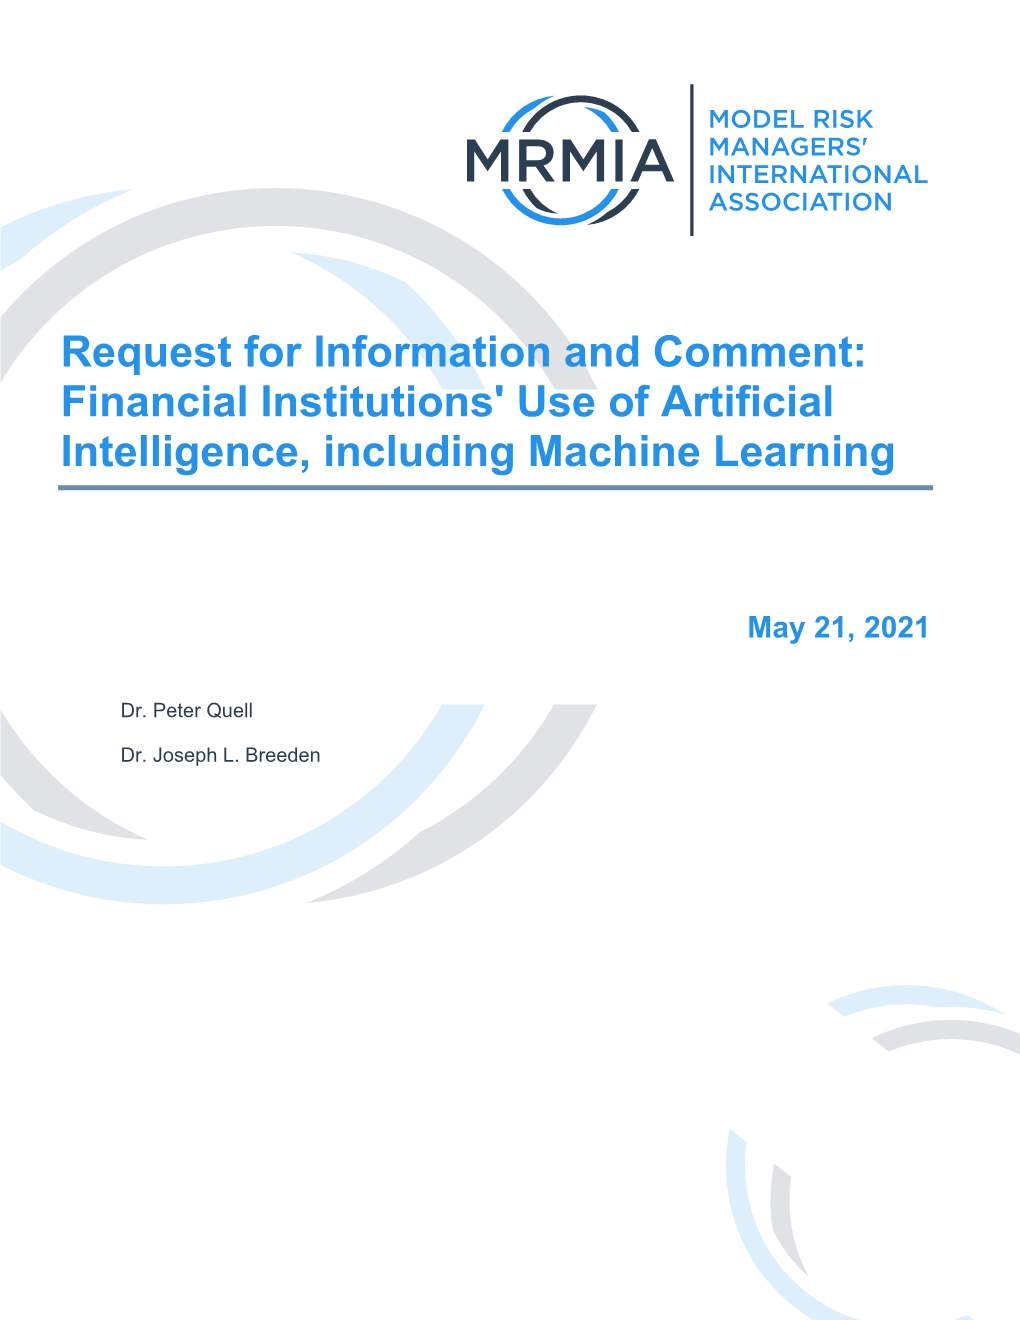 Request for Information and Comment: Financial Institutions' Use of Artificial Intelligence, Including Machine Learning